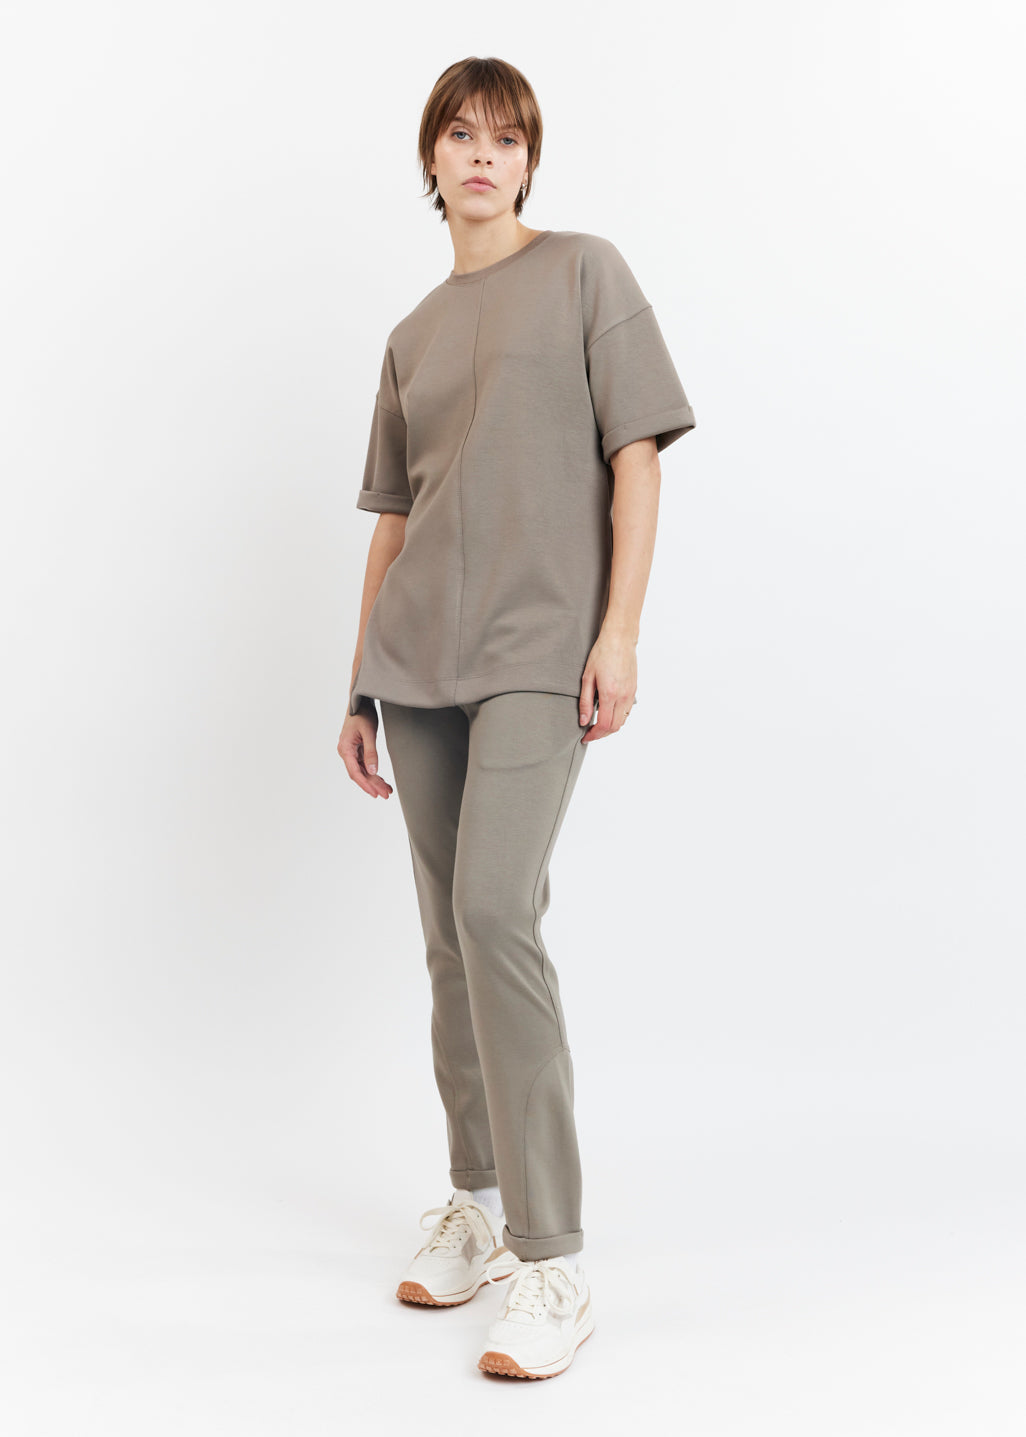 Tear resistant t-shirt for seclusion rooms / Extremely strong fabric -  Tetcon, Een textiel powerhouse